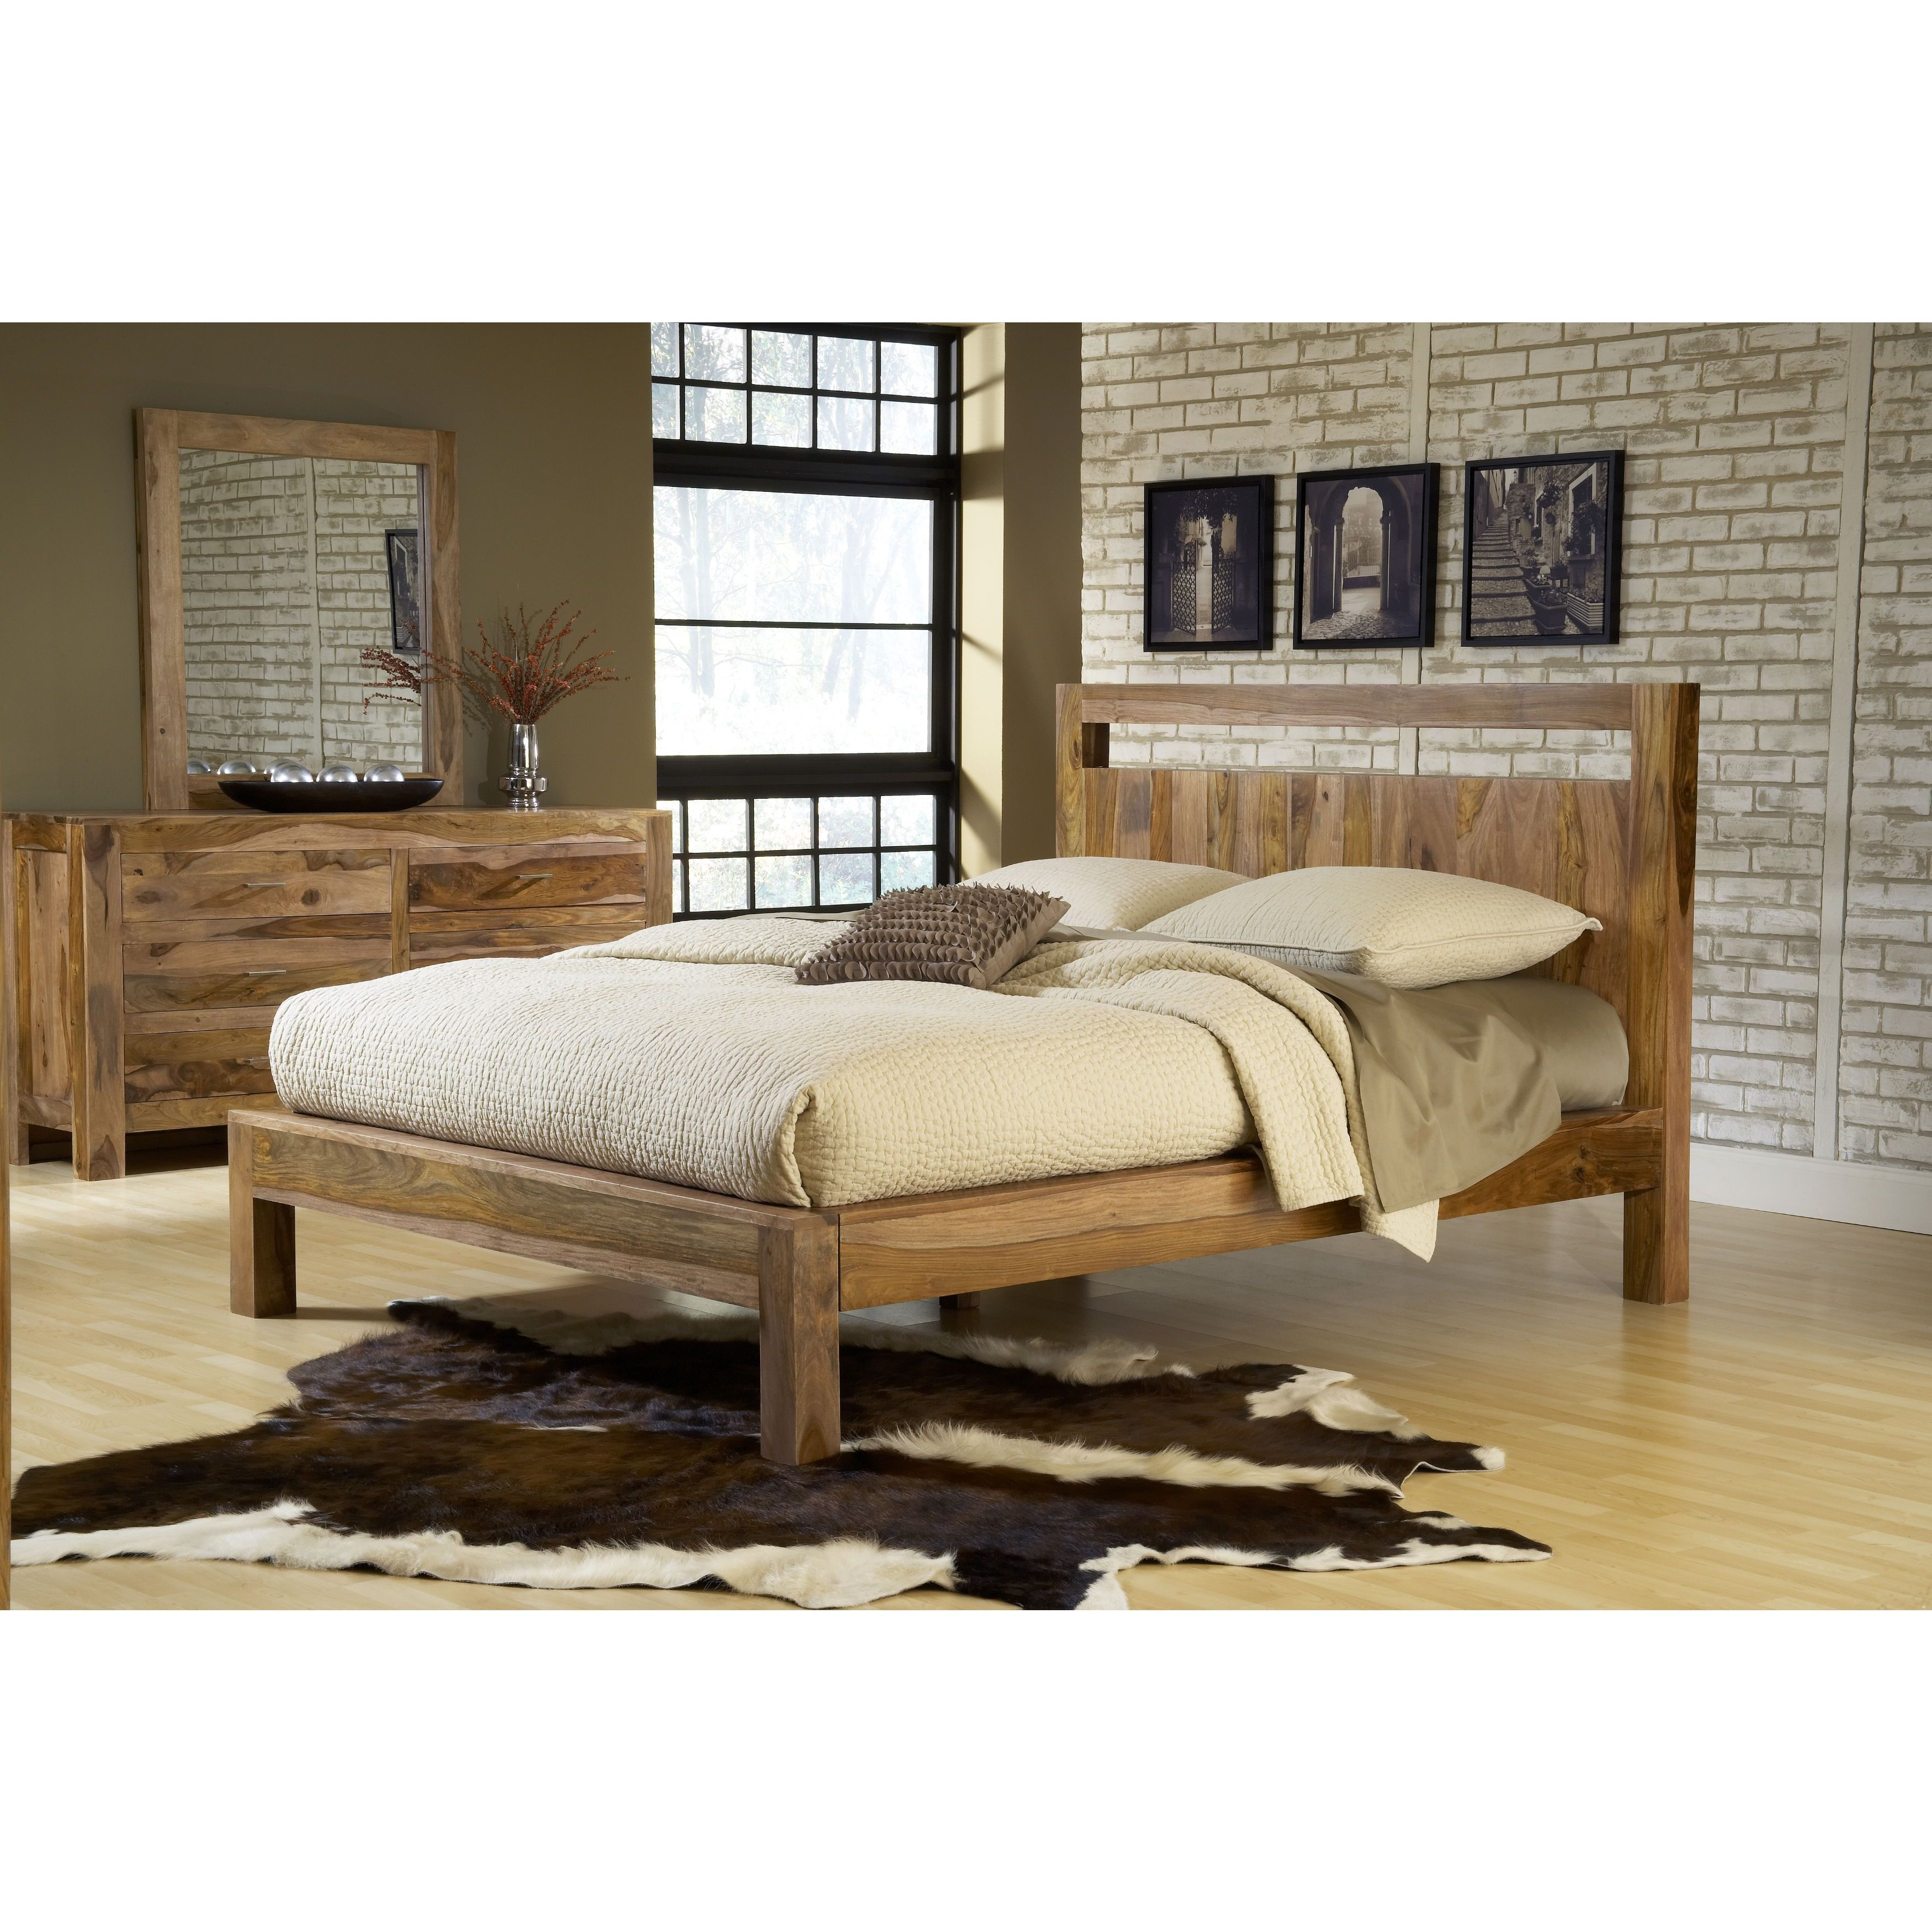 Solid Sheesham Platform Bed Products I Love Bed within proportions 3500 X 3500